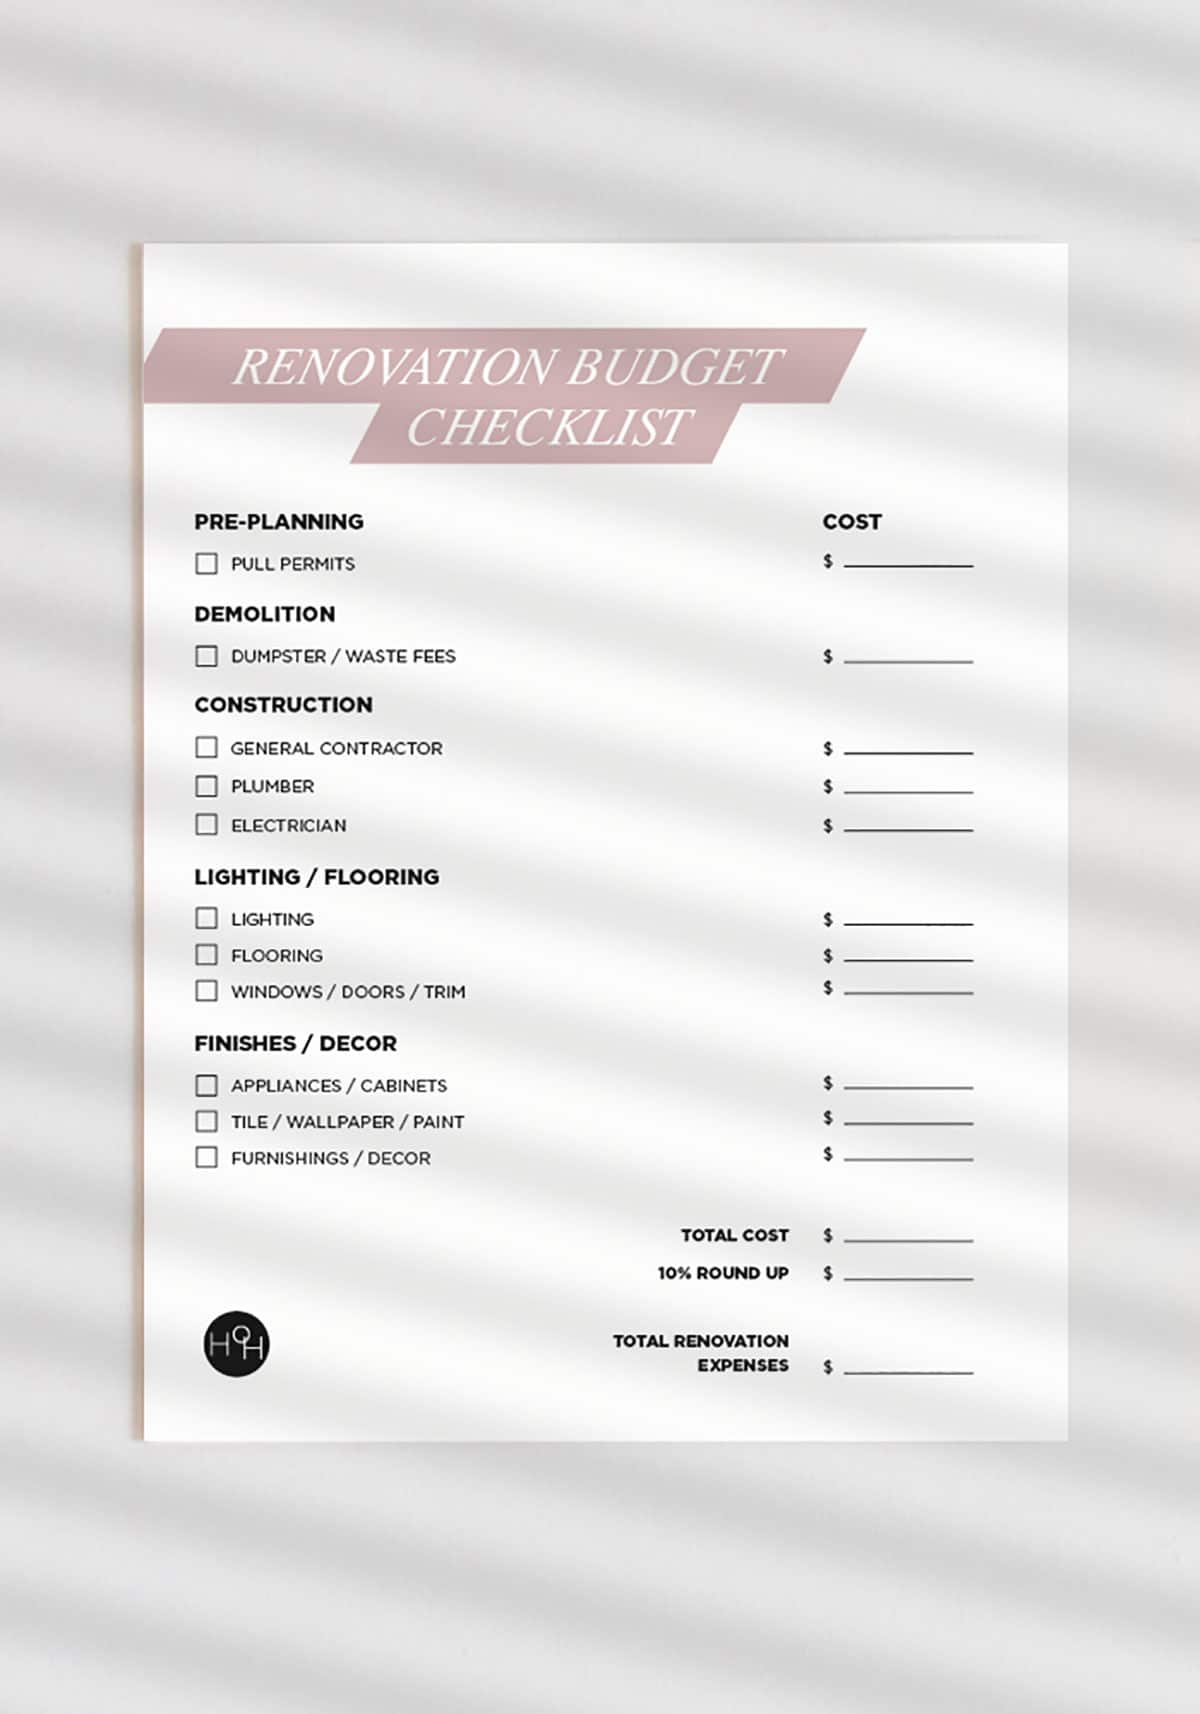 Free Renovation Budget Checklist Download House Of Hipsters